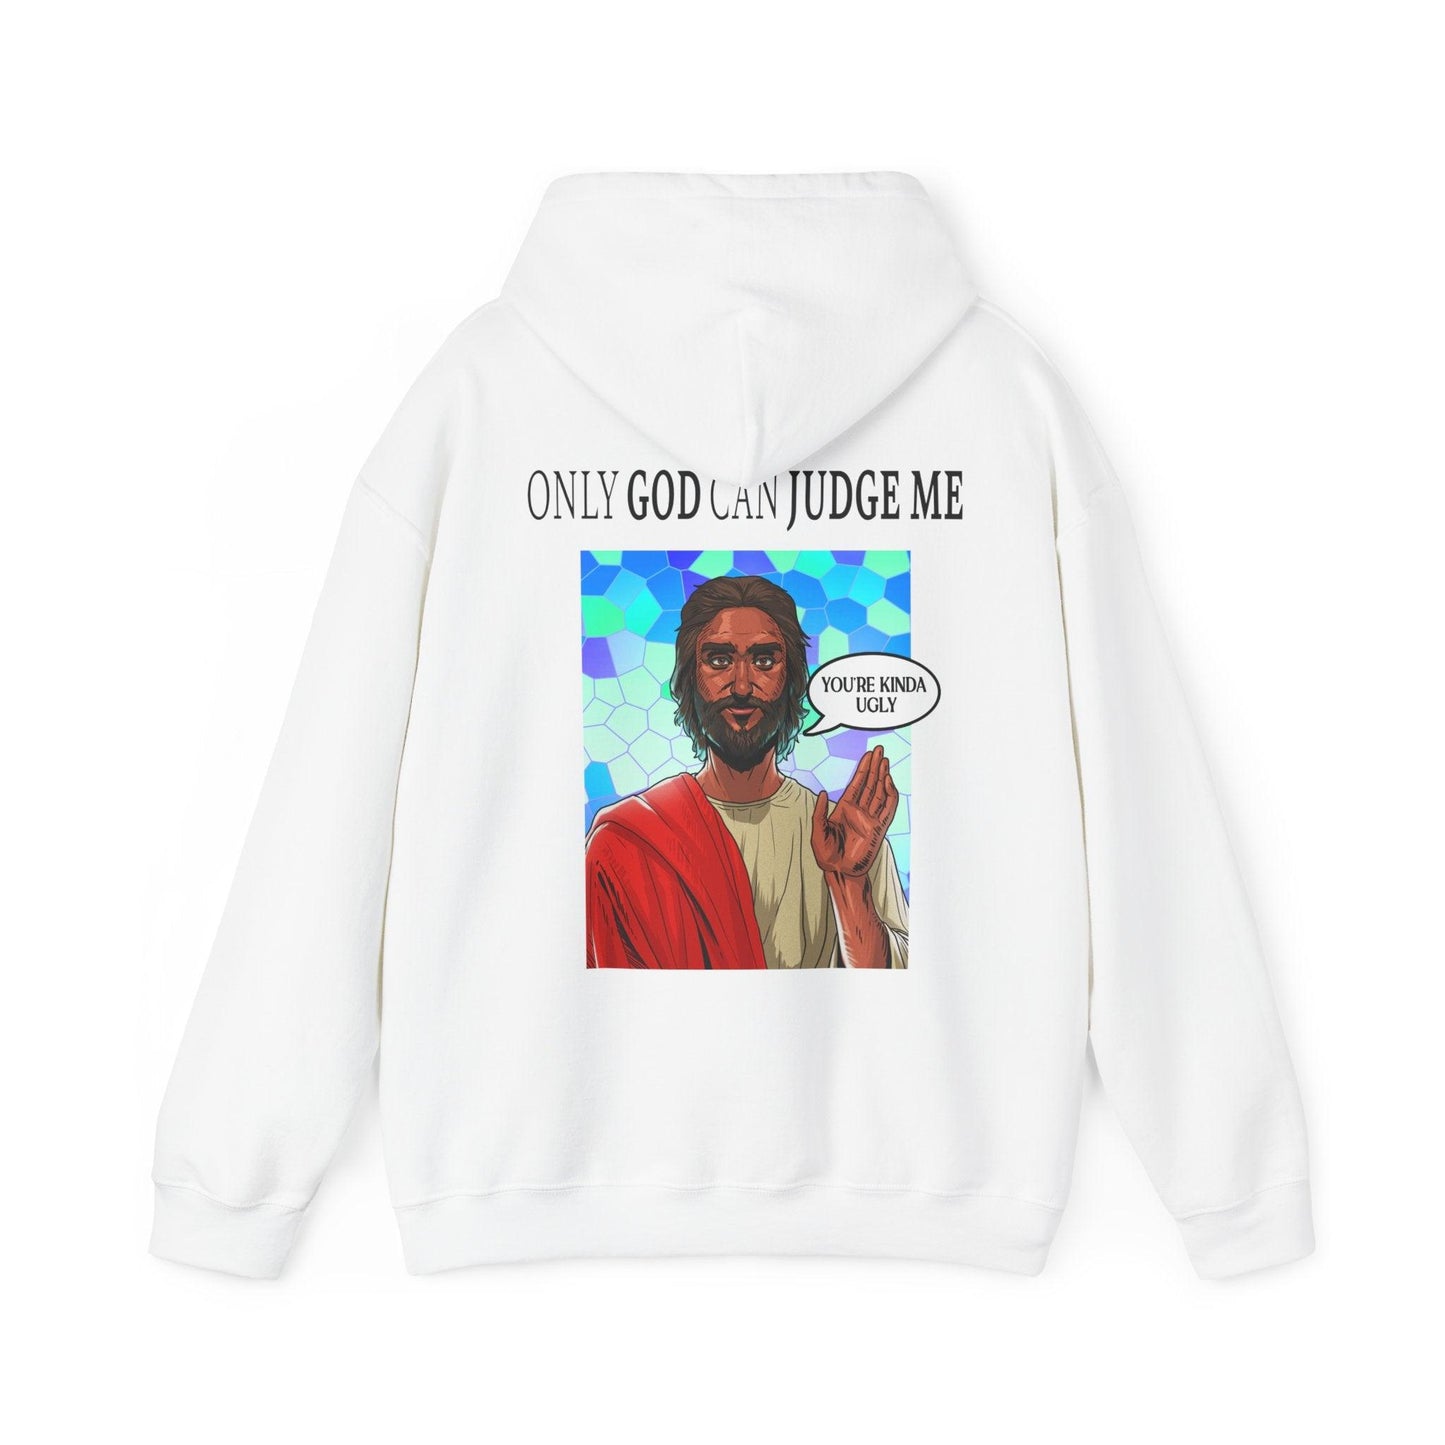 Only God Can Judge Me - Unisex Heavy Blend Hooded Sweatshirt - Shaneinvasion